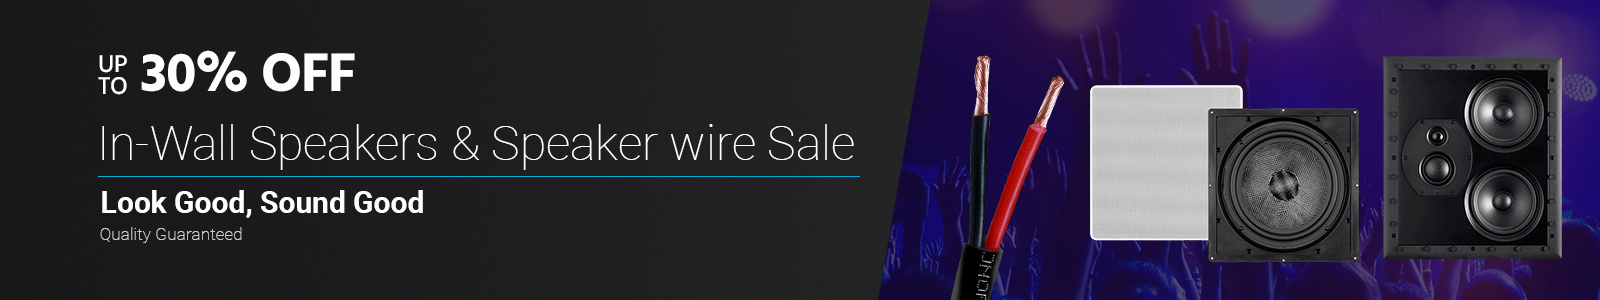 Up to xx% off
In-Wall Speakers & Speaker wire Sale
Look Good, Sound Good
Quality Guaranteed
Shop Now